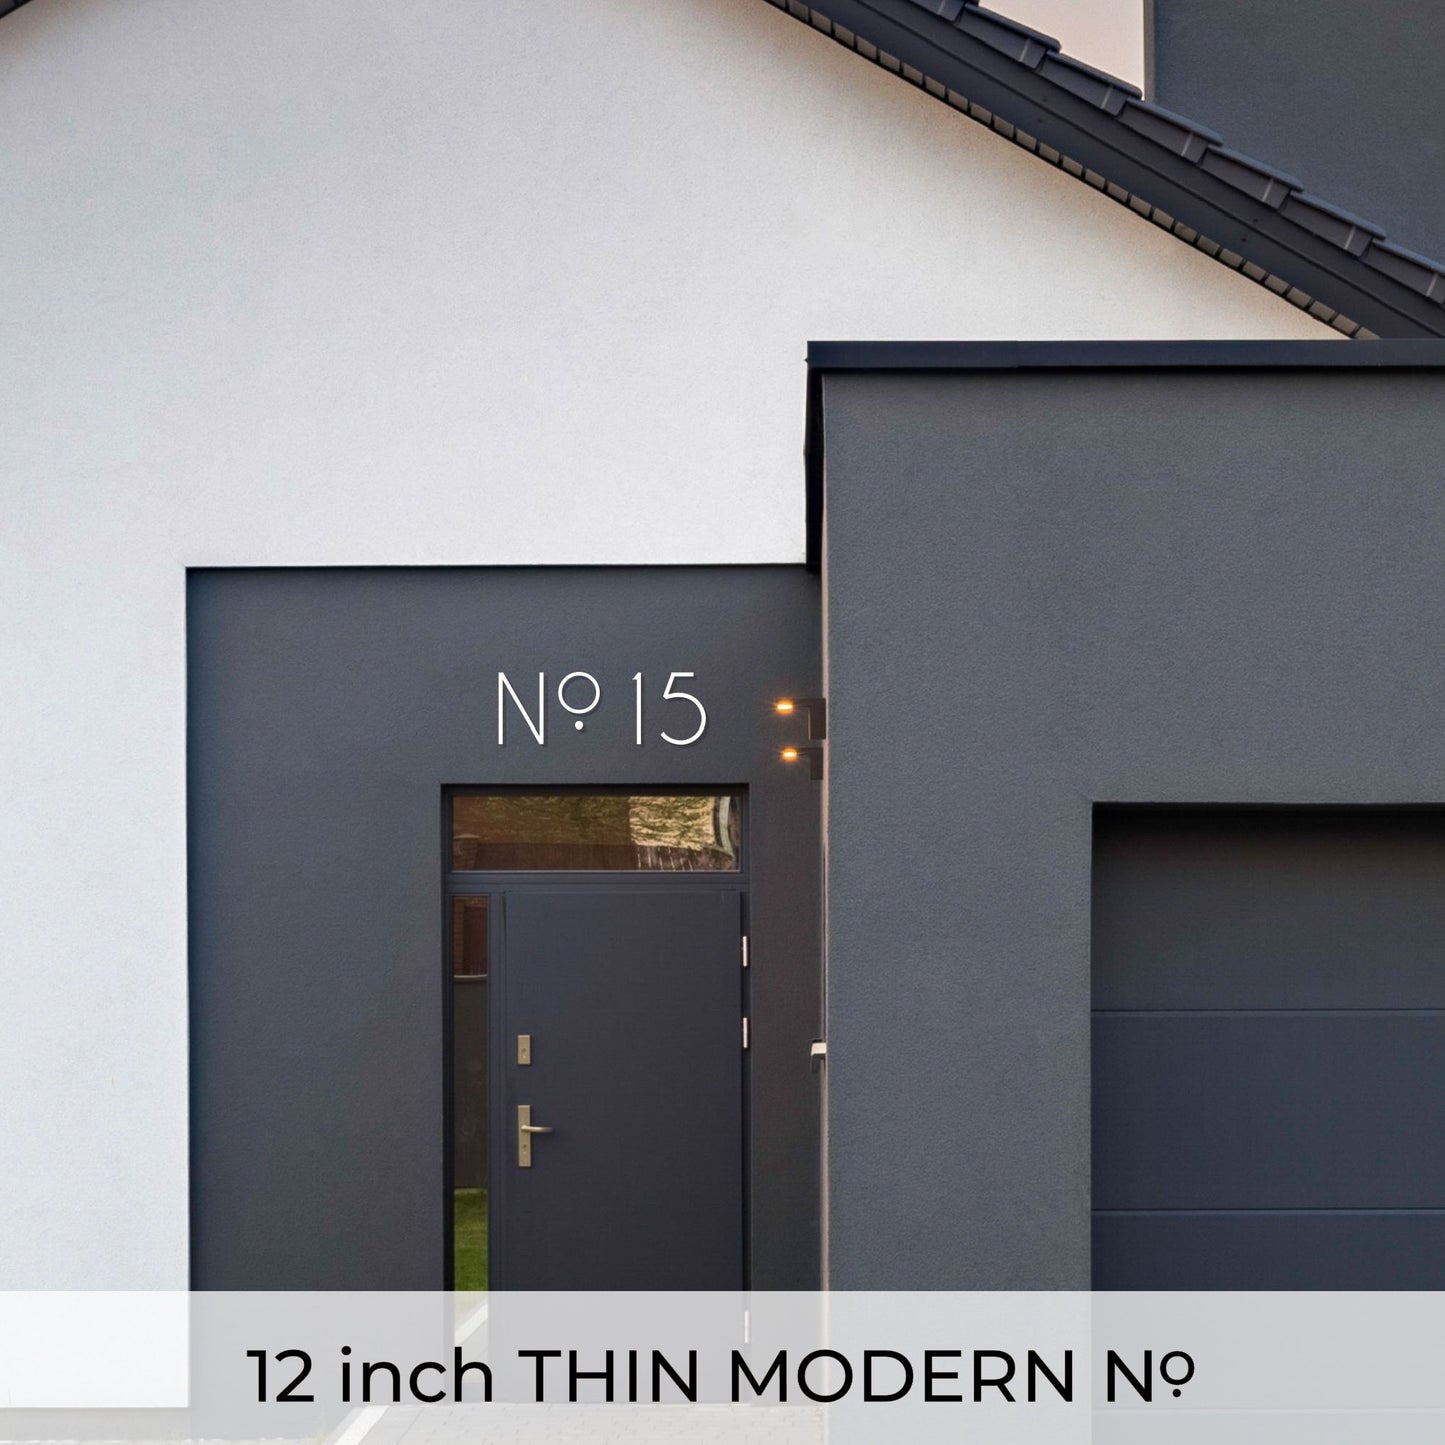 THIN MODERN House No. letters for address sign